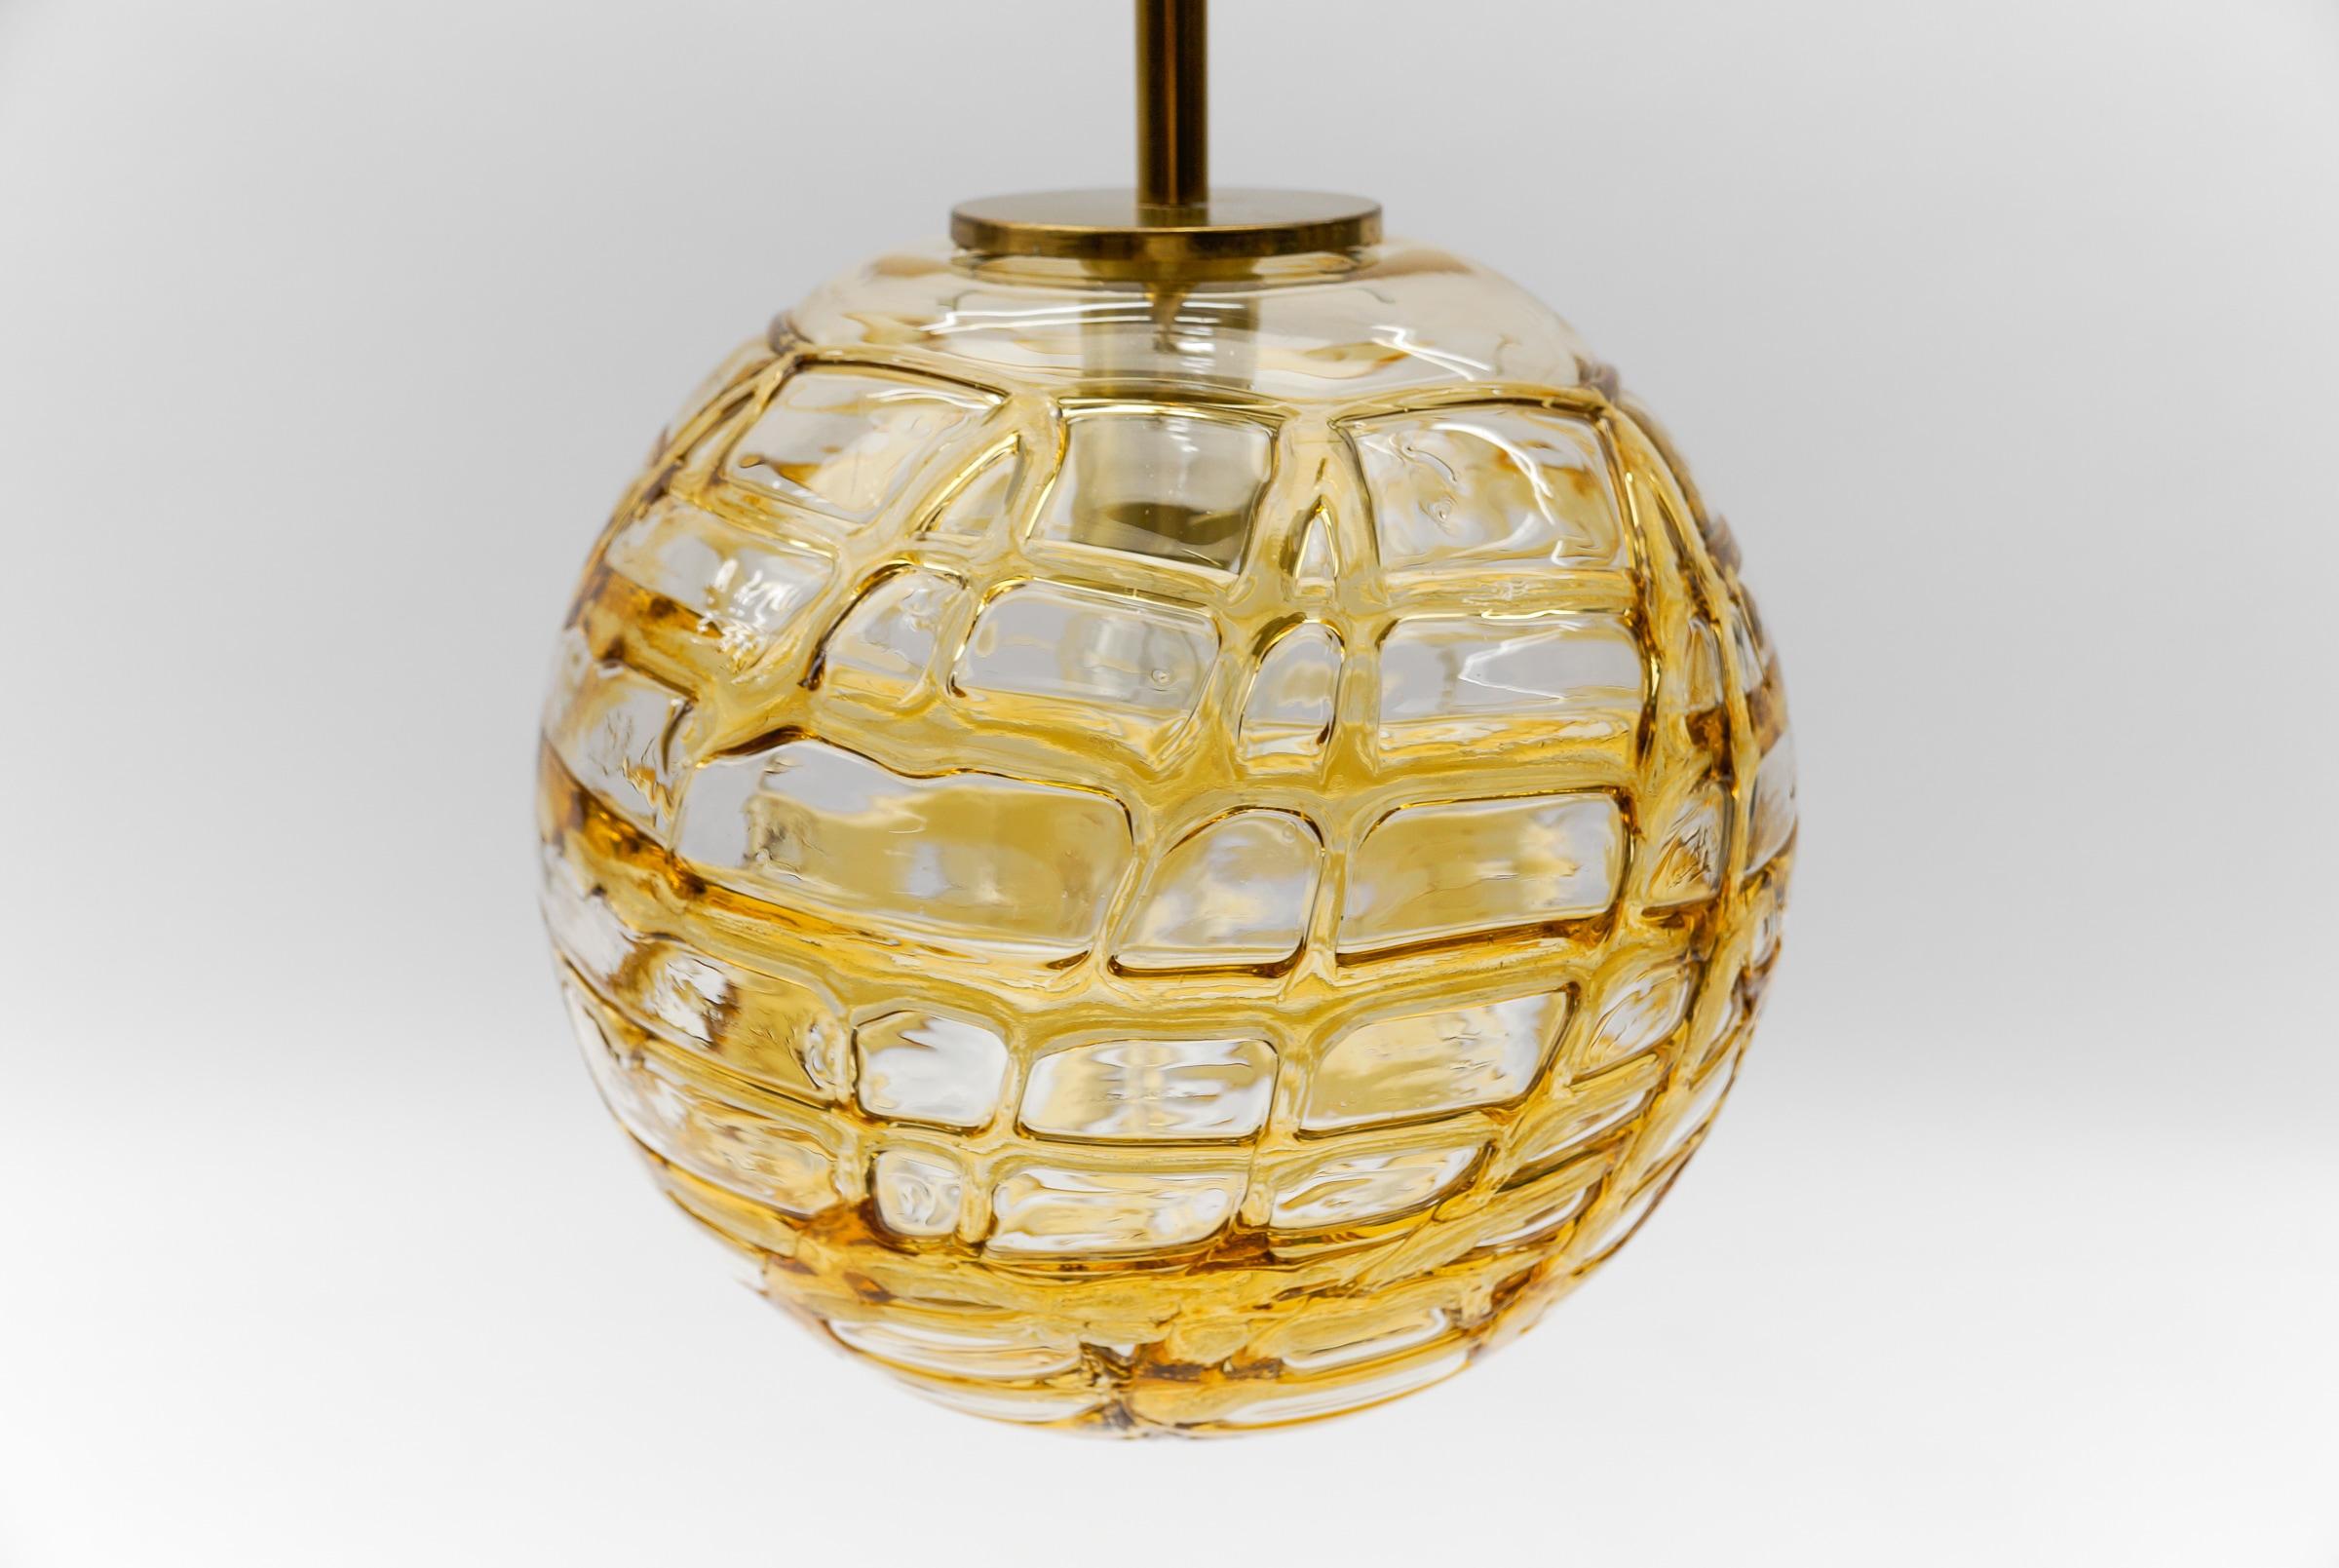 Lovely Yellow Murano Glass Ball Pendant Lamp by Doria, - 1960s Germany For Sale 3